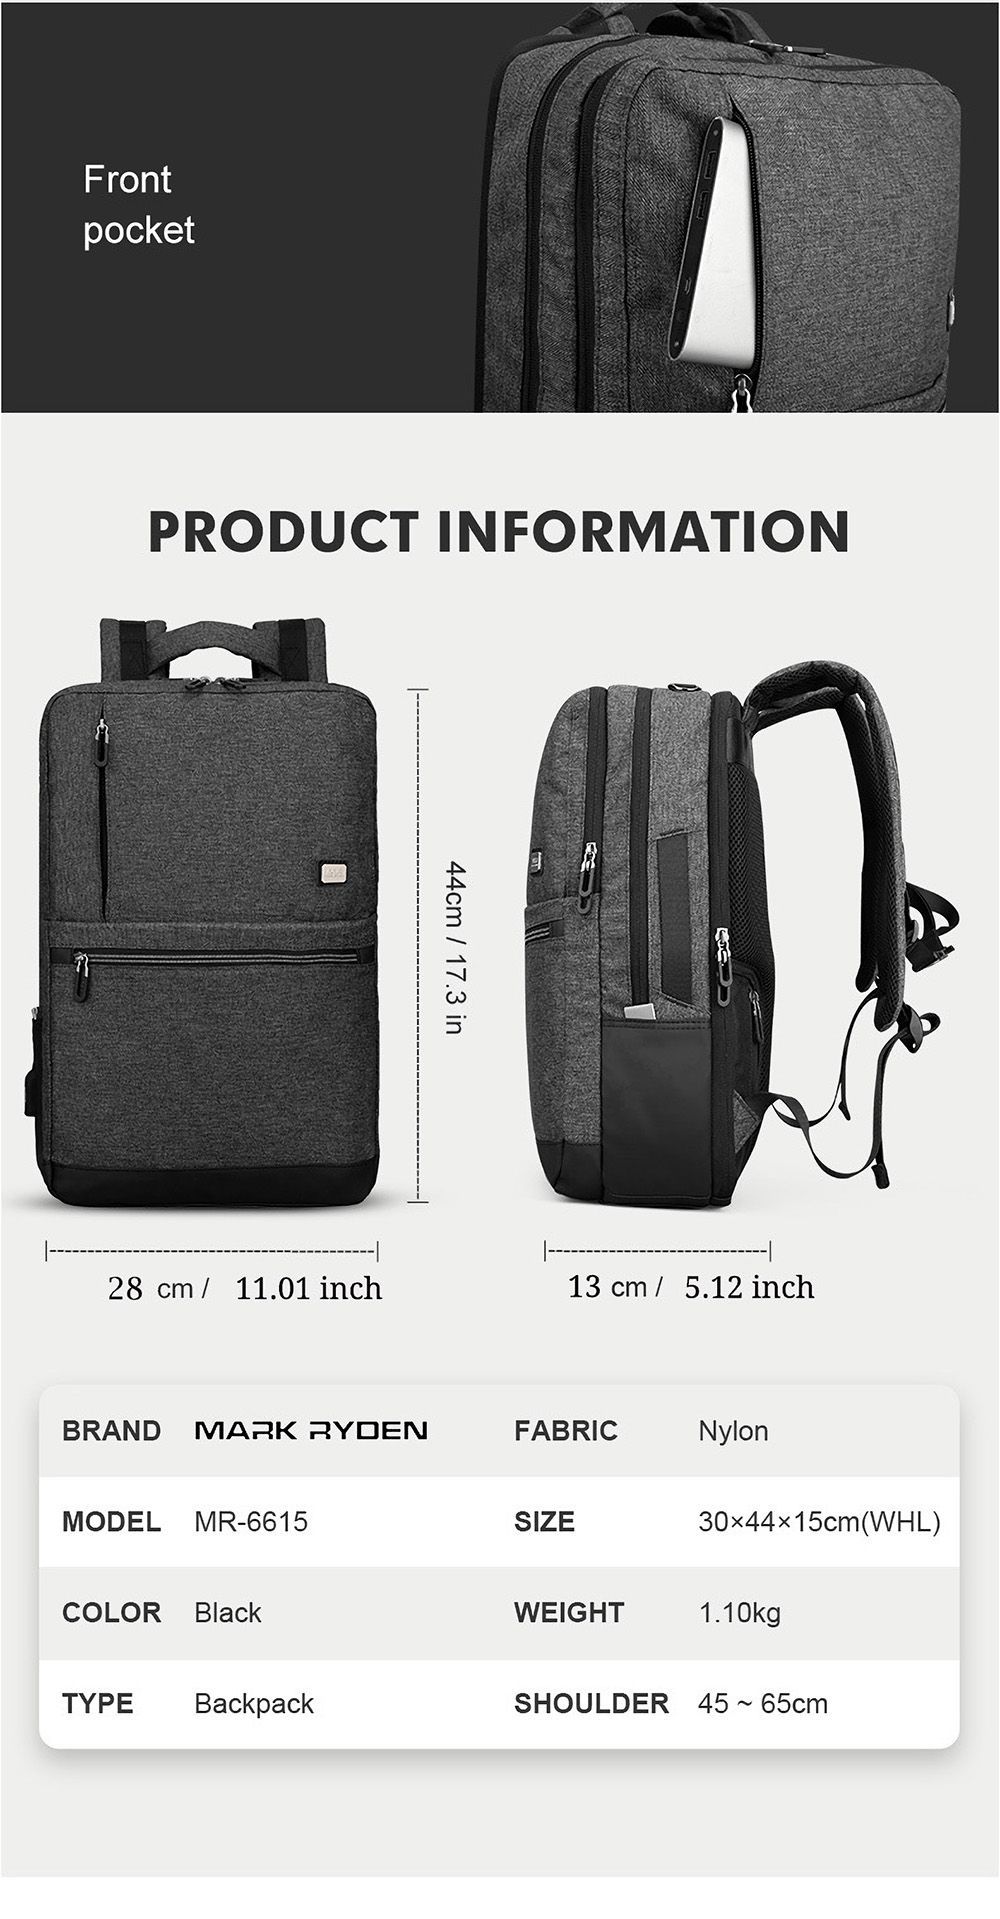 OUTWALK-156-inch-Laptop-Bag-Backpack-with-USB-Charging-Outdoor-Sports-Travel-Backpack-Waterproof-Sho-1558151